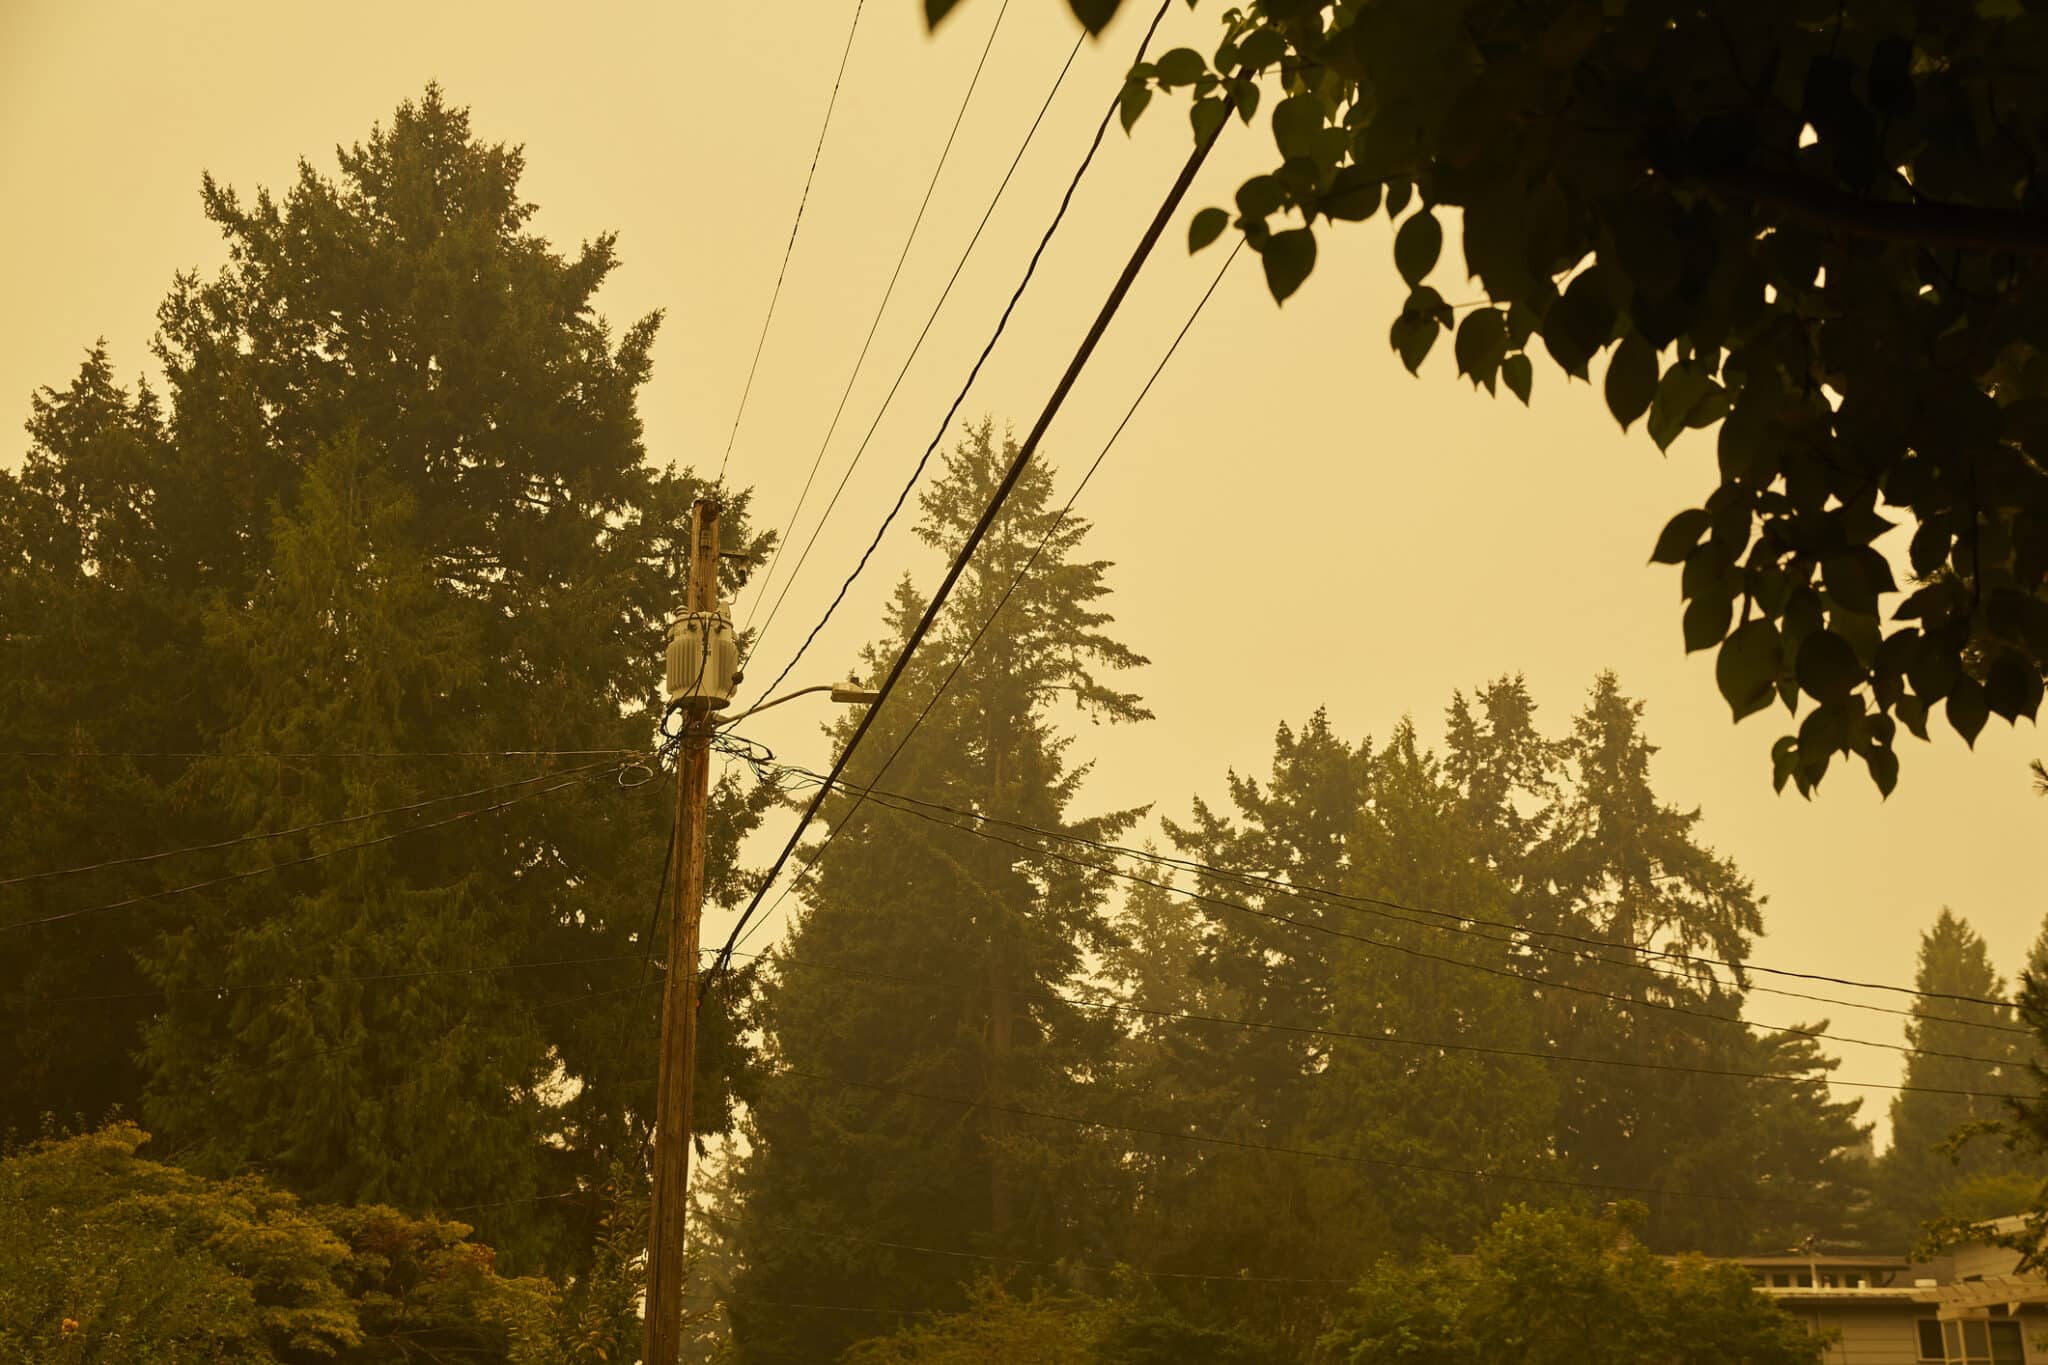 Oregon Follows California’s Lead in Shutting Off Power to Prevent Fires